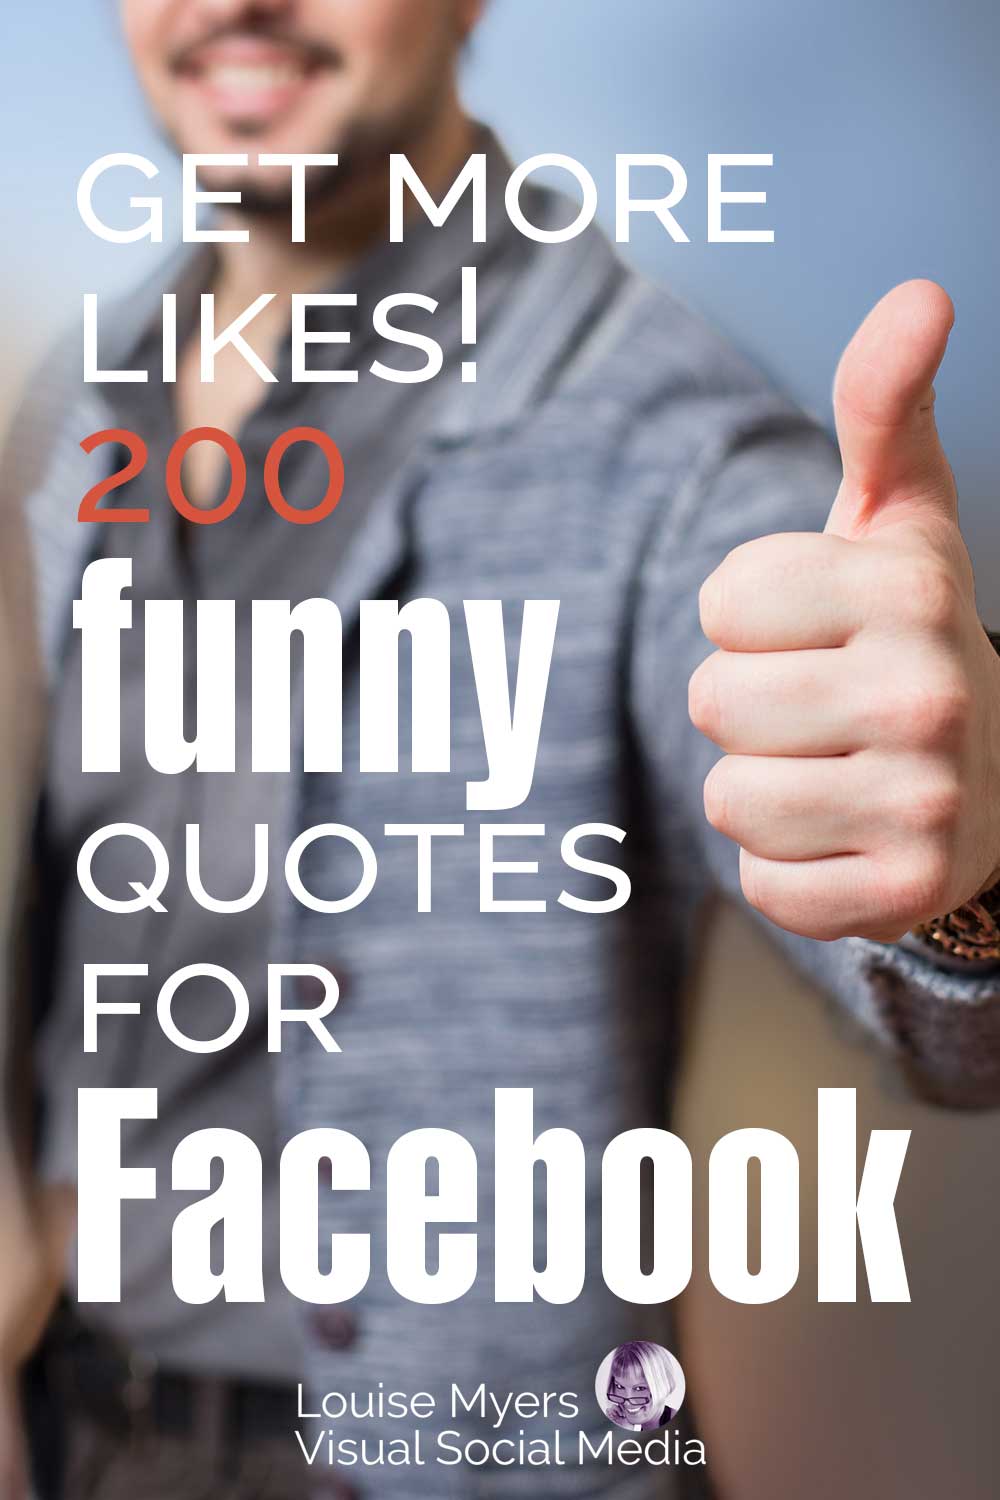 stylish man with thumb up says funny quotes for Facebook.